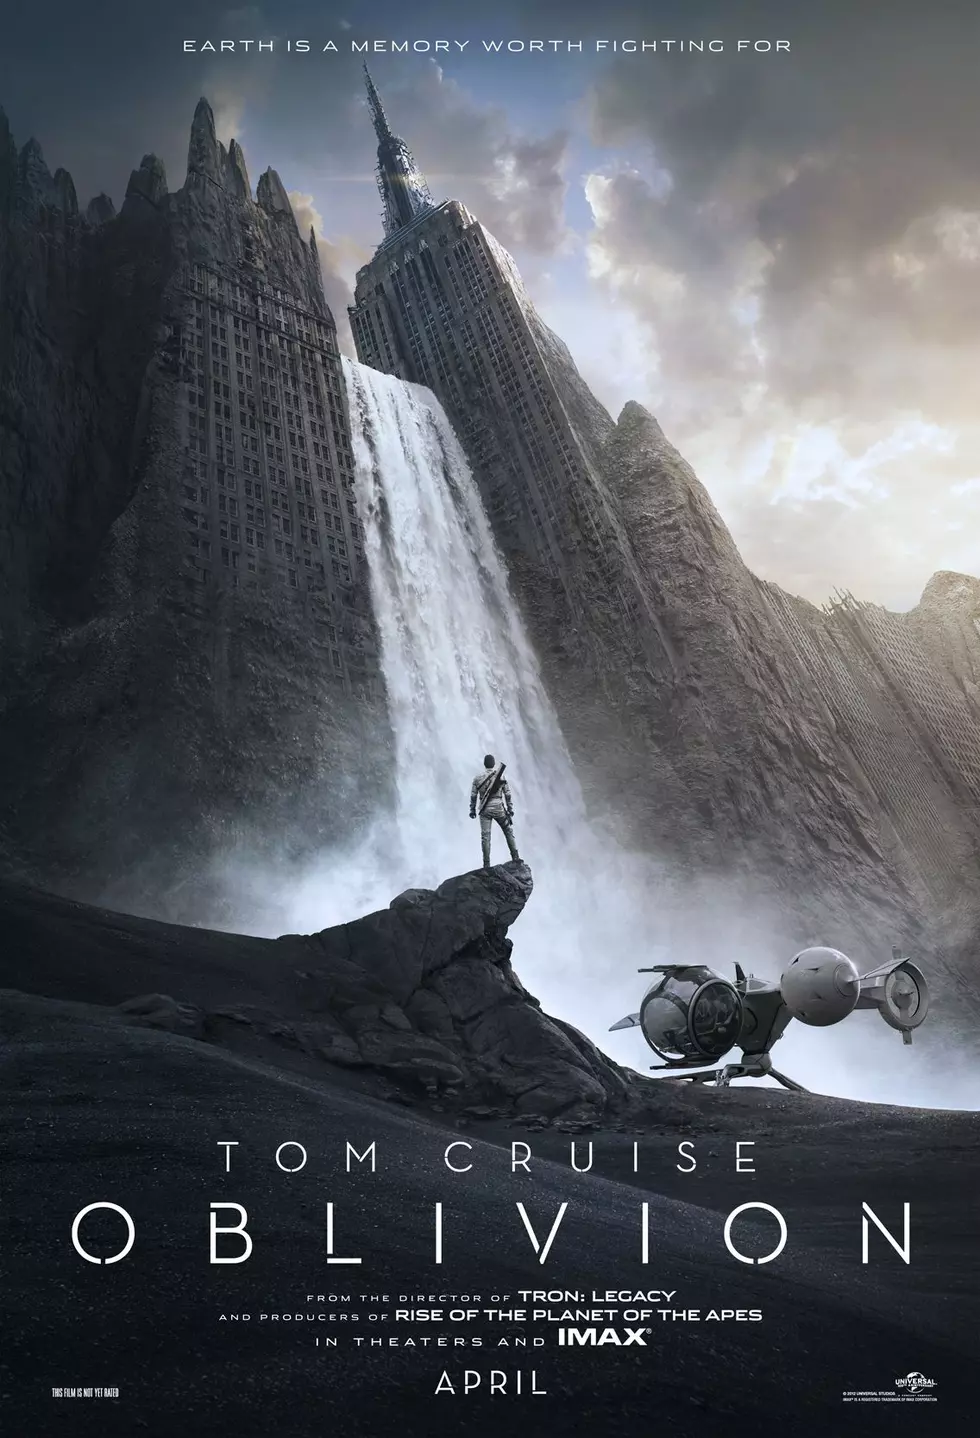 ‘Oblivion’ Poster: Tom Cruise Is Our Last Hope!